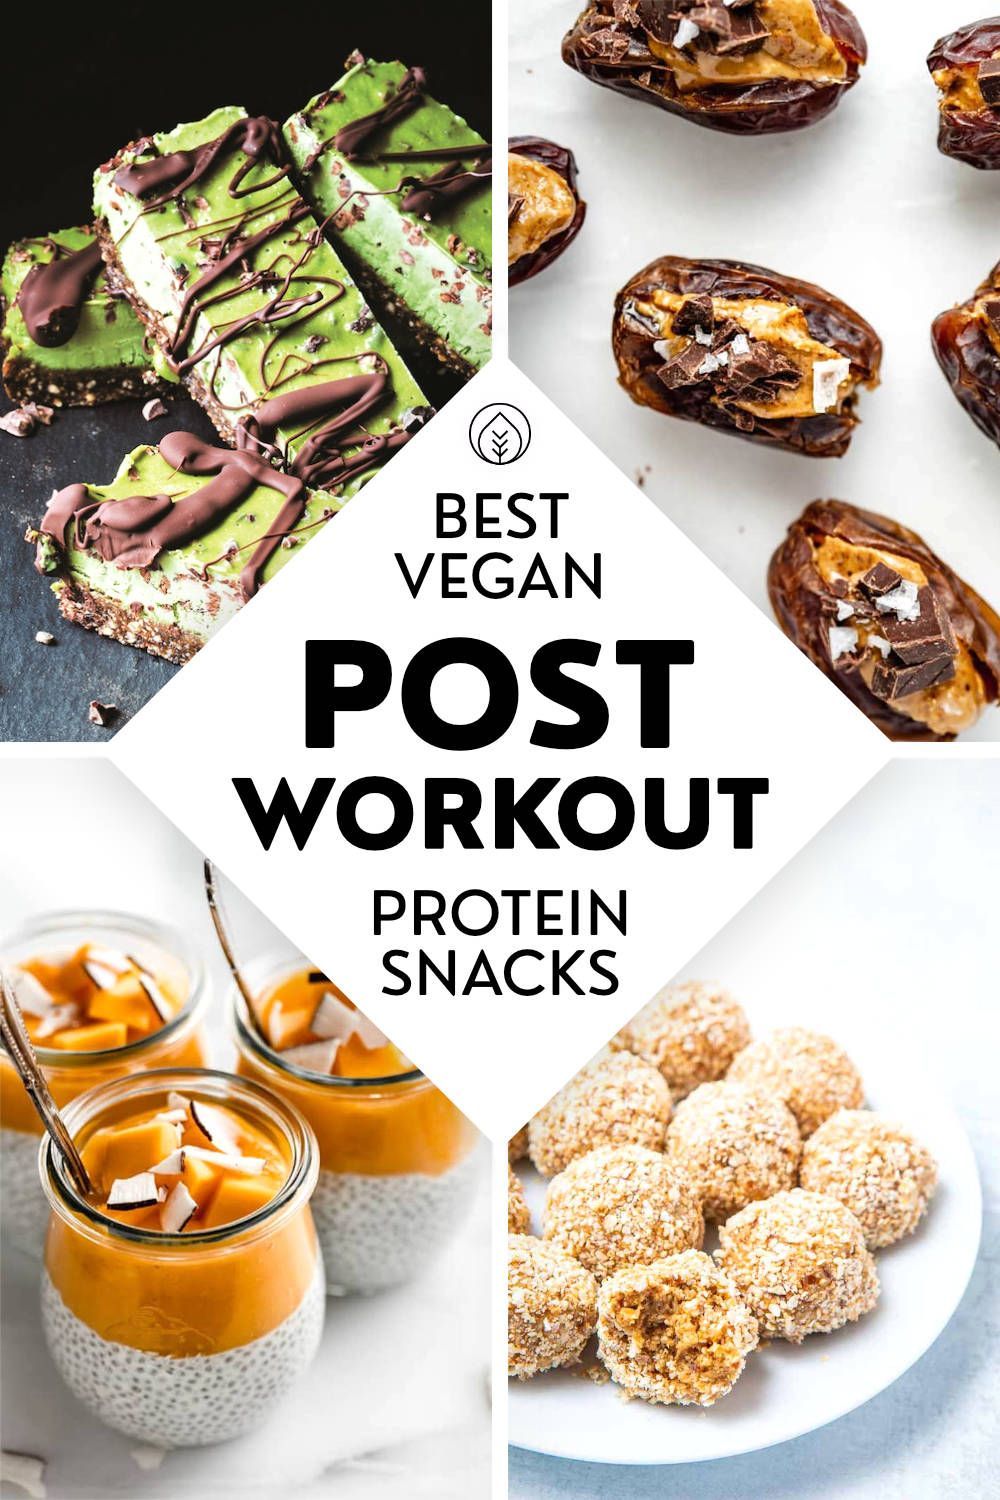 32 Best Healthy Vegan Post-Workout Snacks High in Protein - 32 Best Healthy Vegan Post-Workout Snacks High in Protein -   18 fitness Training clean eating ideas